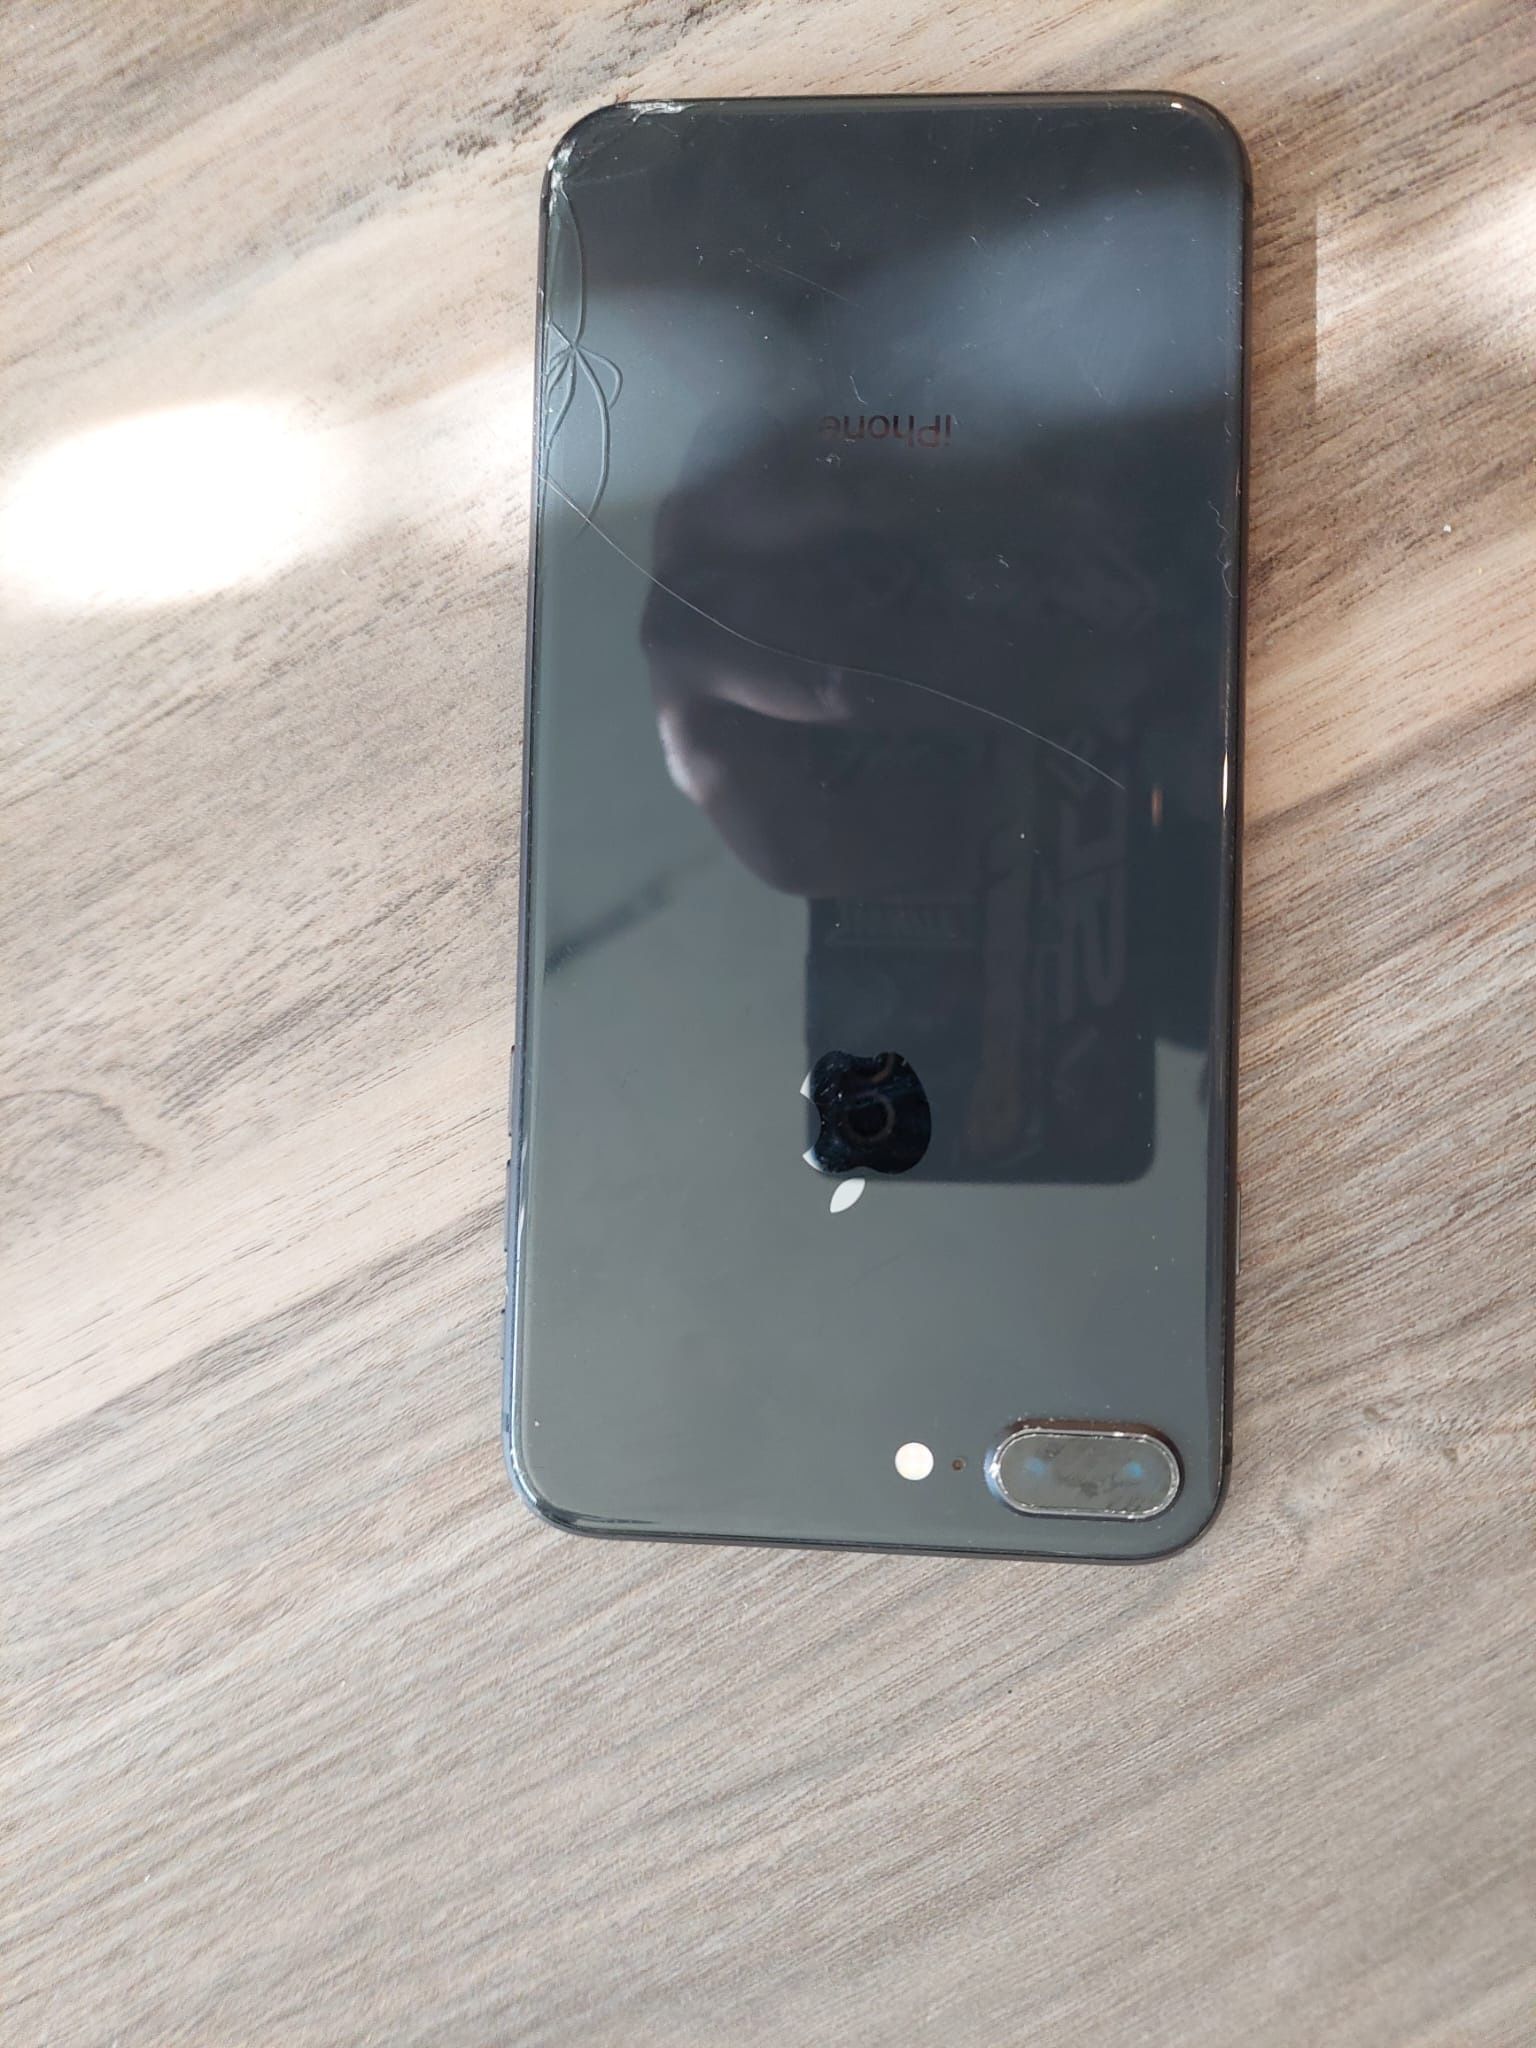 iPhone 8 , locked And Cracked 